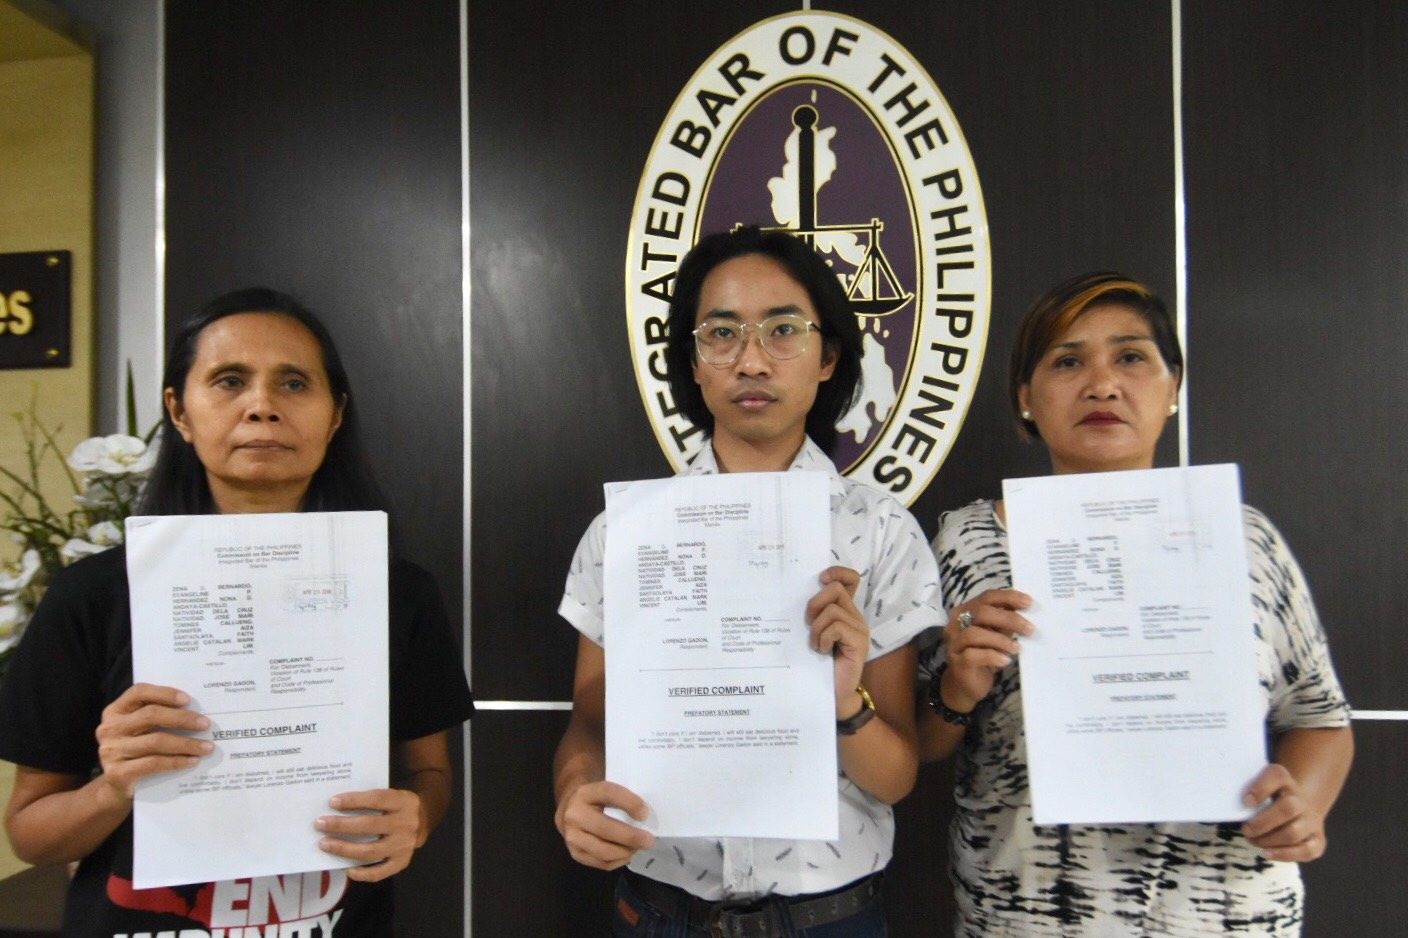 ANOTHER DISBARMENT COMPLAINT. (L-R) Nona Andaya-Castillo, Jose Mari Callueng, and Natividad dela Cruz Natividad hold up their group's disbarment complaint against Larry Gadon filed before the Integrated Bar of the Philippines. Photo by Angie de Silva/Rappler 